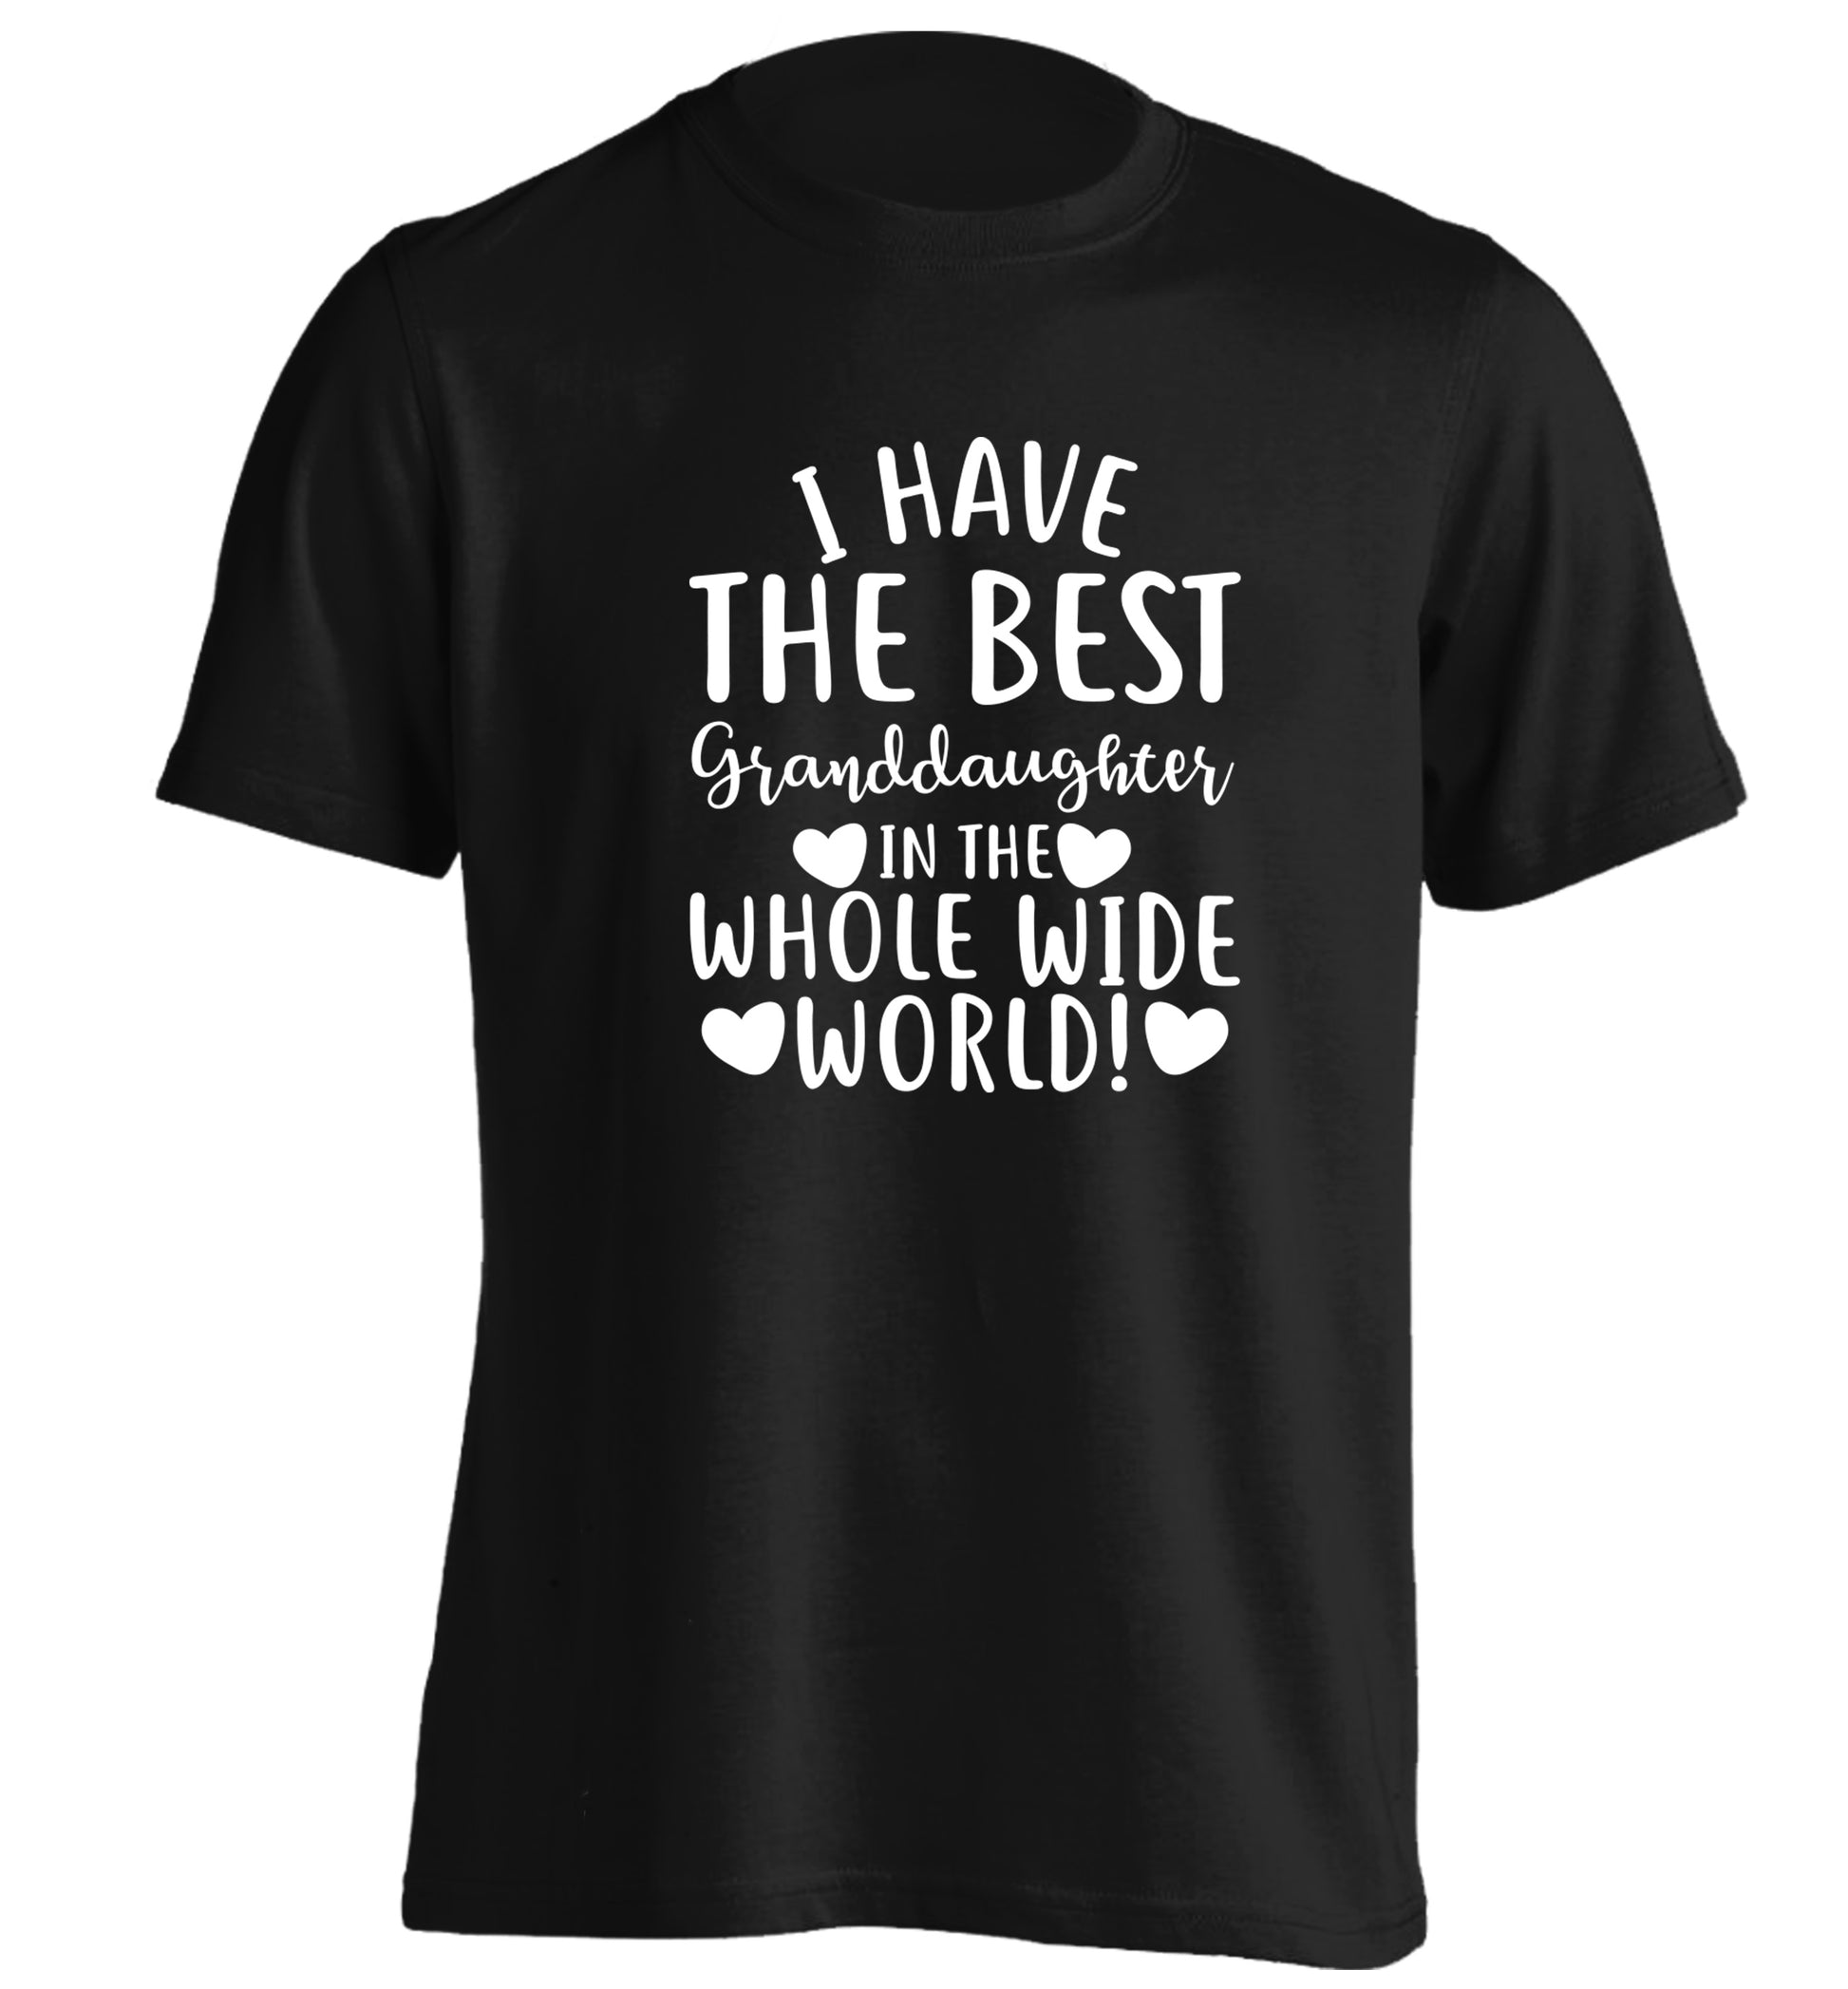 I have the best granddaughter in the whole wide world! adults unisex black Tshirt 2XL